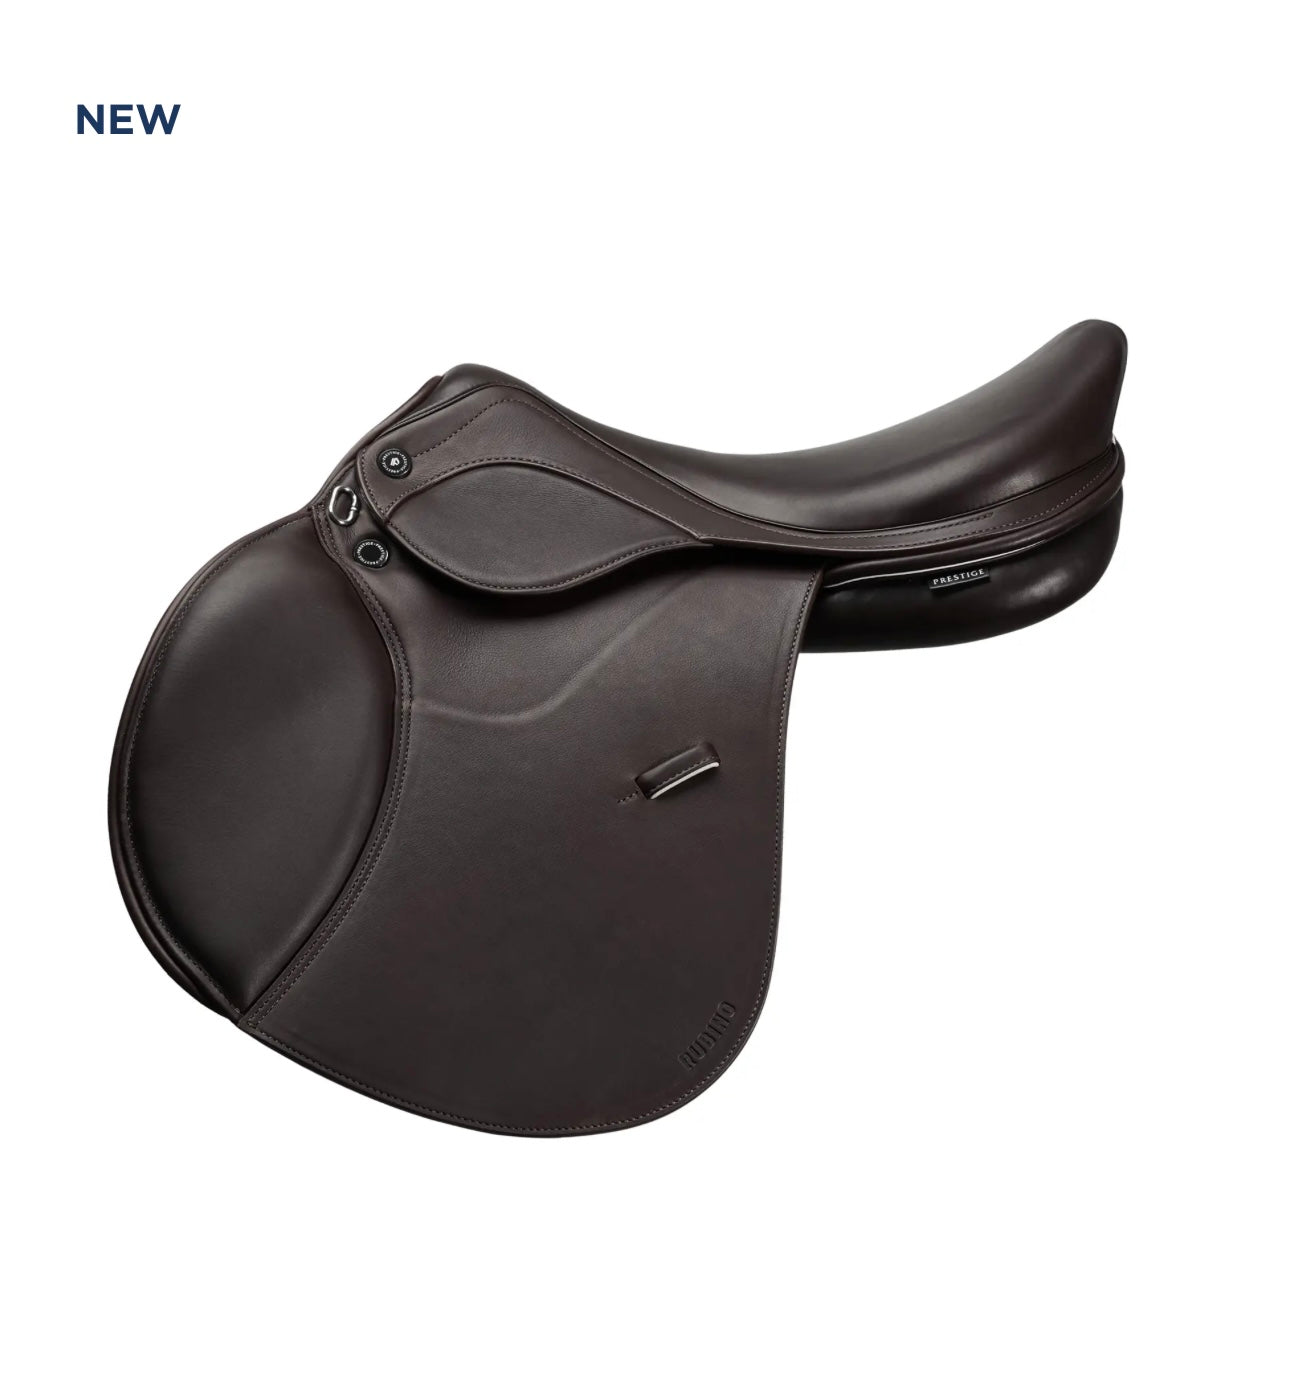 Prestige Rubino MD AS-X Jumping Saddle NEW TO THE MARKET